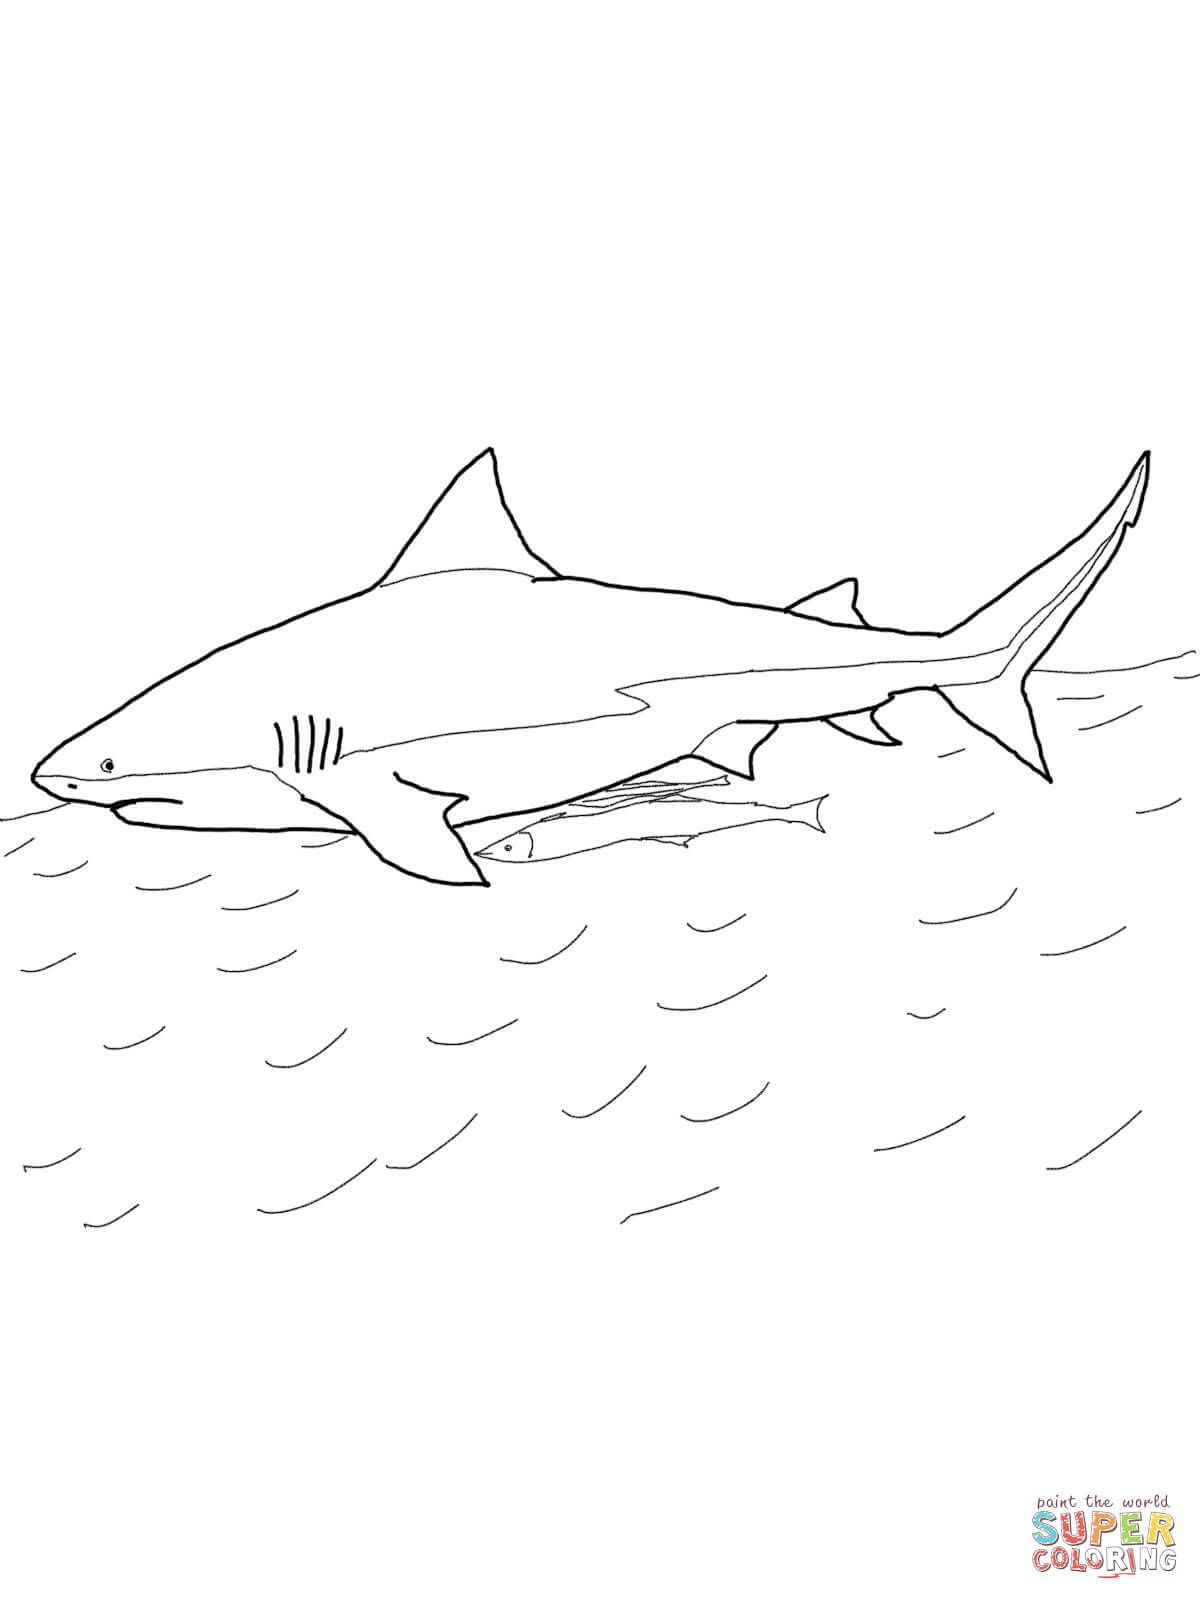 Sharks Coloring Pages Free Coloring Pages | Shark Coloring Pages - Free Printable Shark Coloring Pages